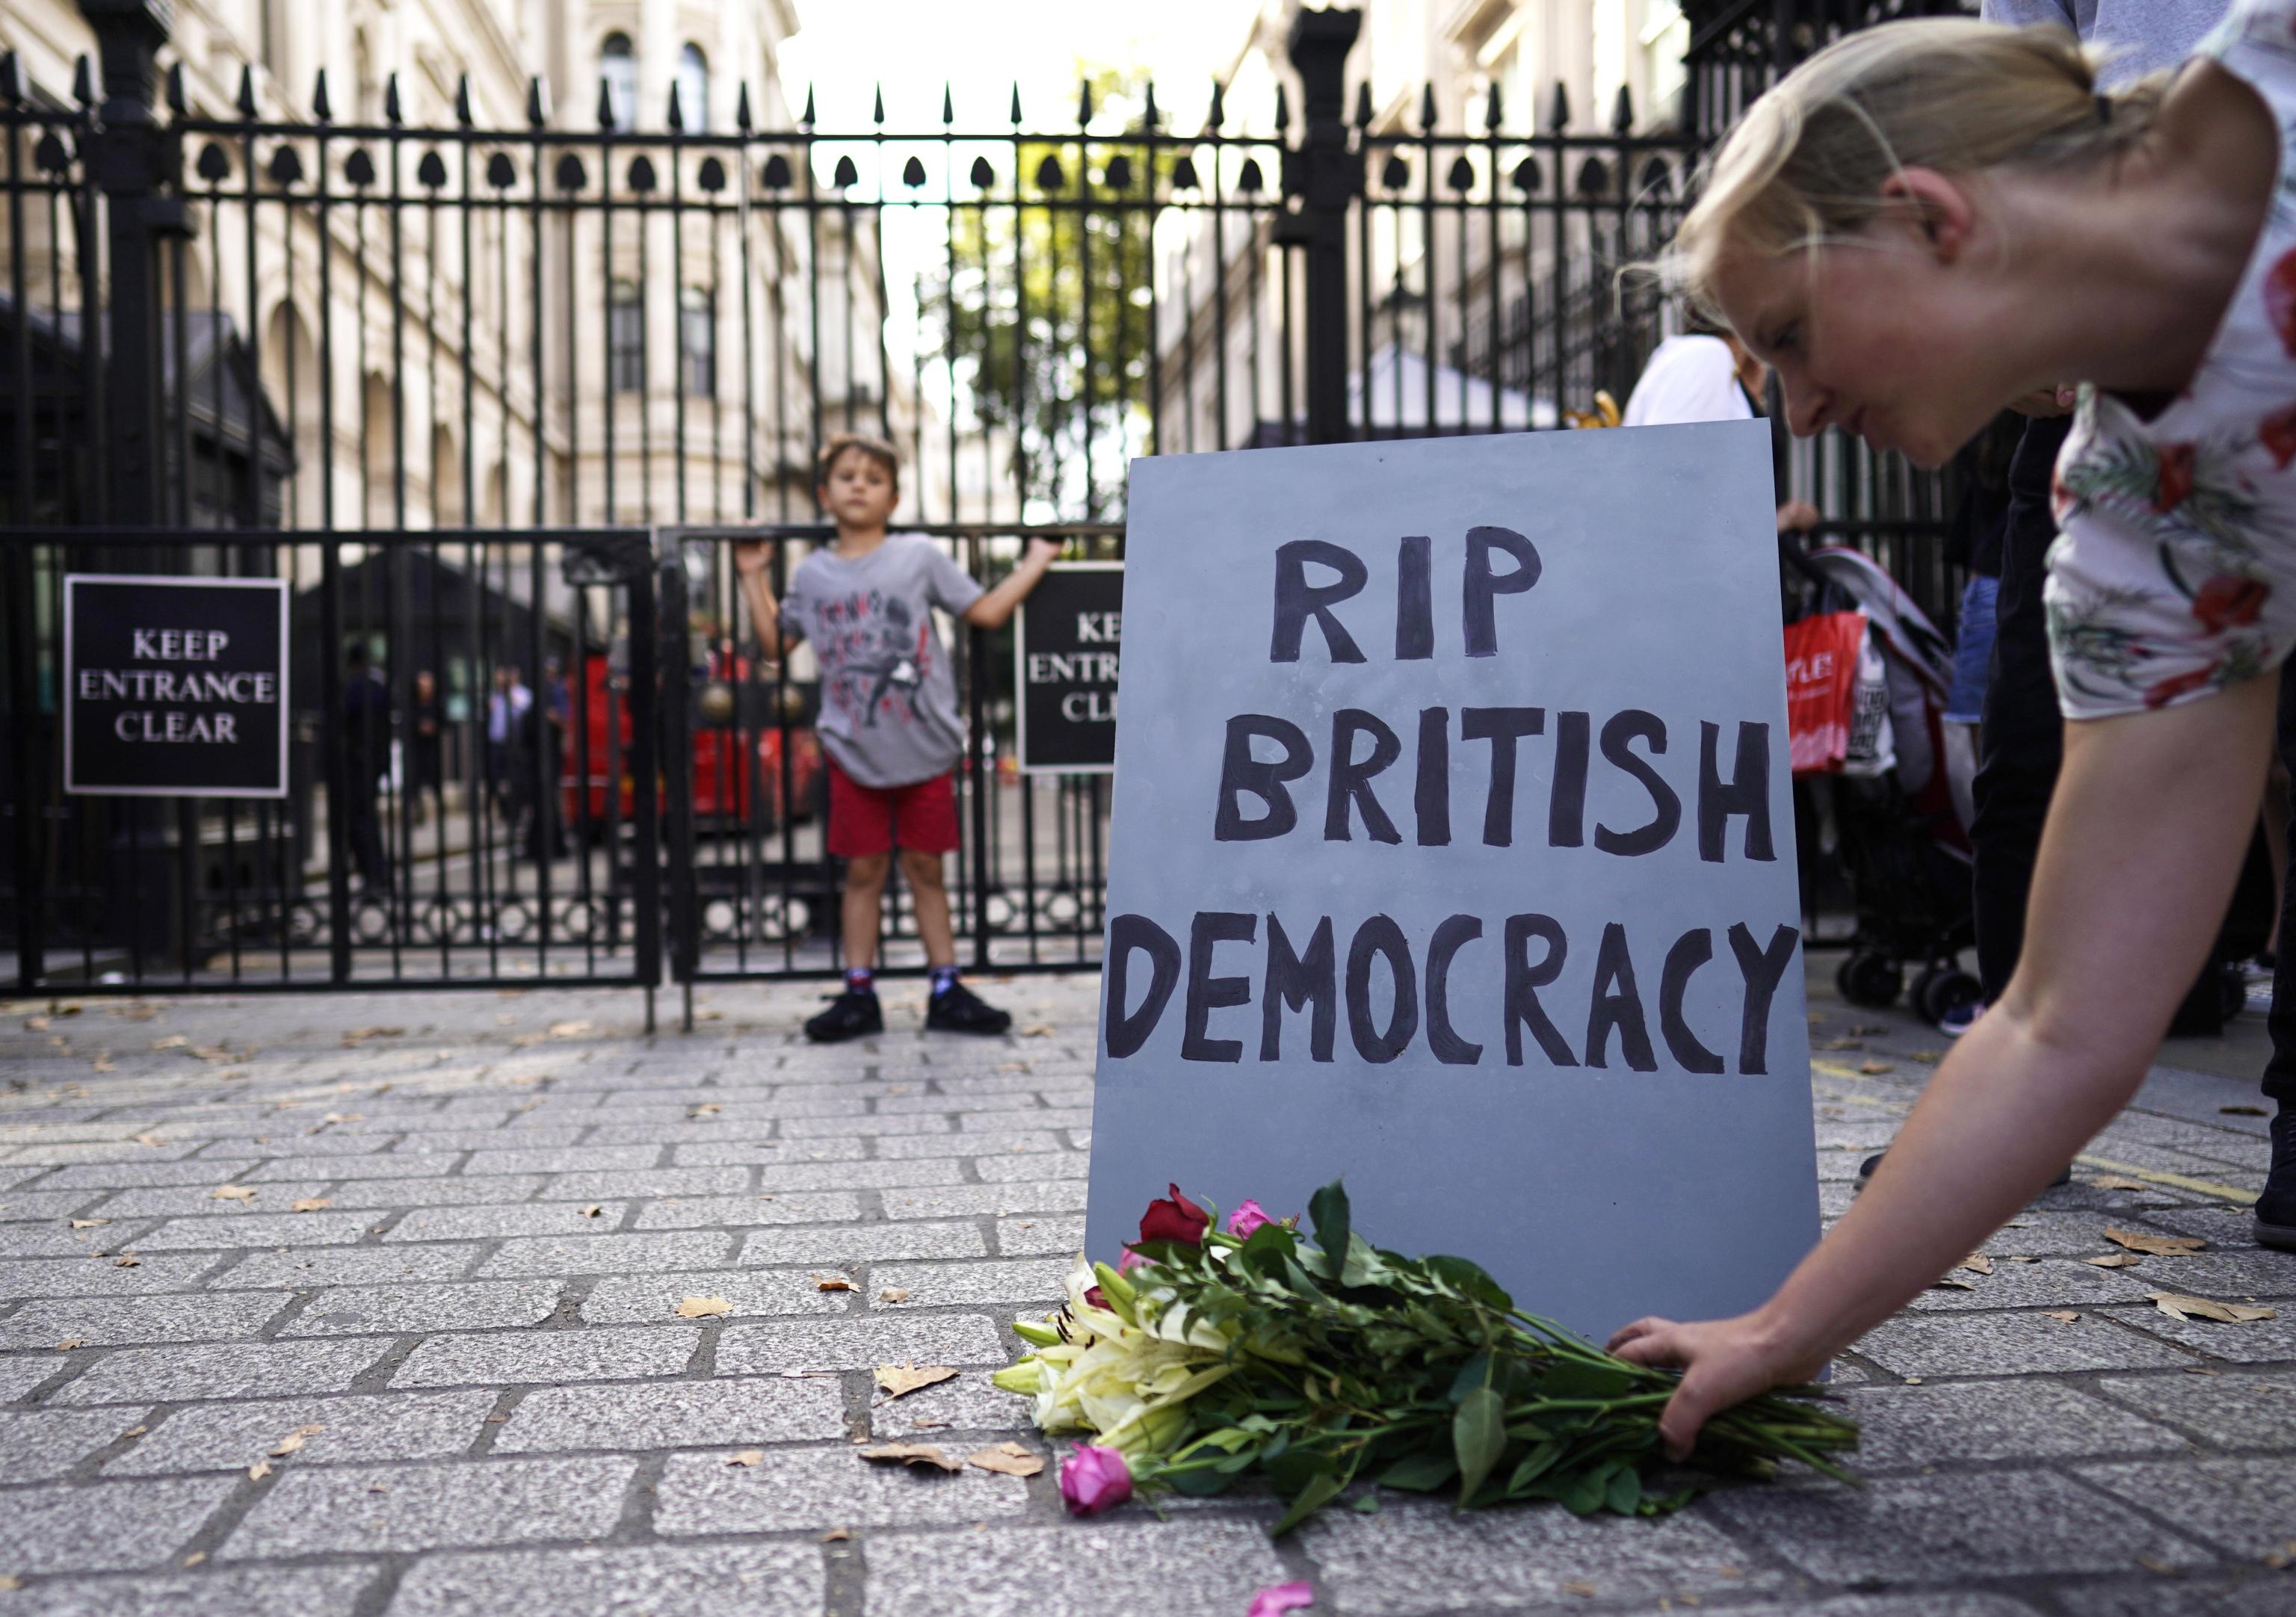 epa07799380 A protester lays flowers in front of a mock tombstone, during a protest outside the gates of Number 10 Downing Street in Westminster, London, Britain, 28 August 2019. The UK government is to suspend Parliament after the summer break, a move that might block MPs from voting against a possible no-deal Brexit. In a letter to legislators, British PM Boris Johnson said he had asked Queen Elizabeth II to suspend the current parliamentary session in the second week of September until 14 October.  EPA/WILL OLIVER